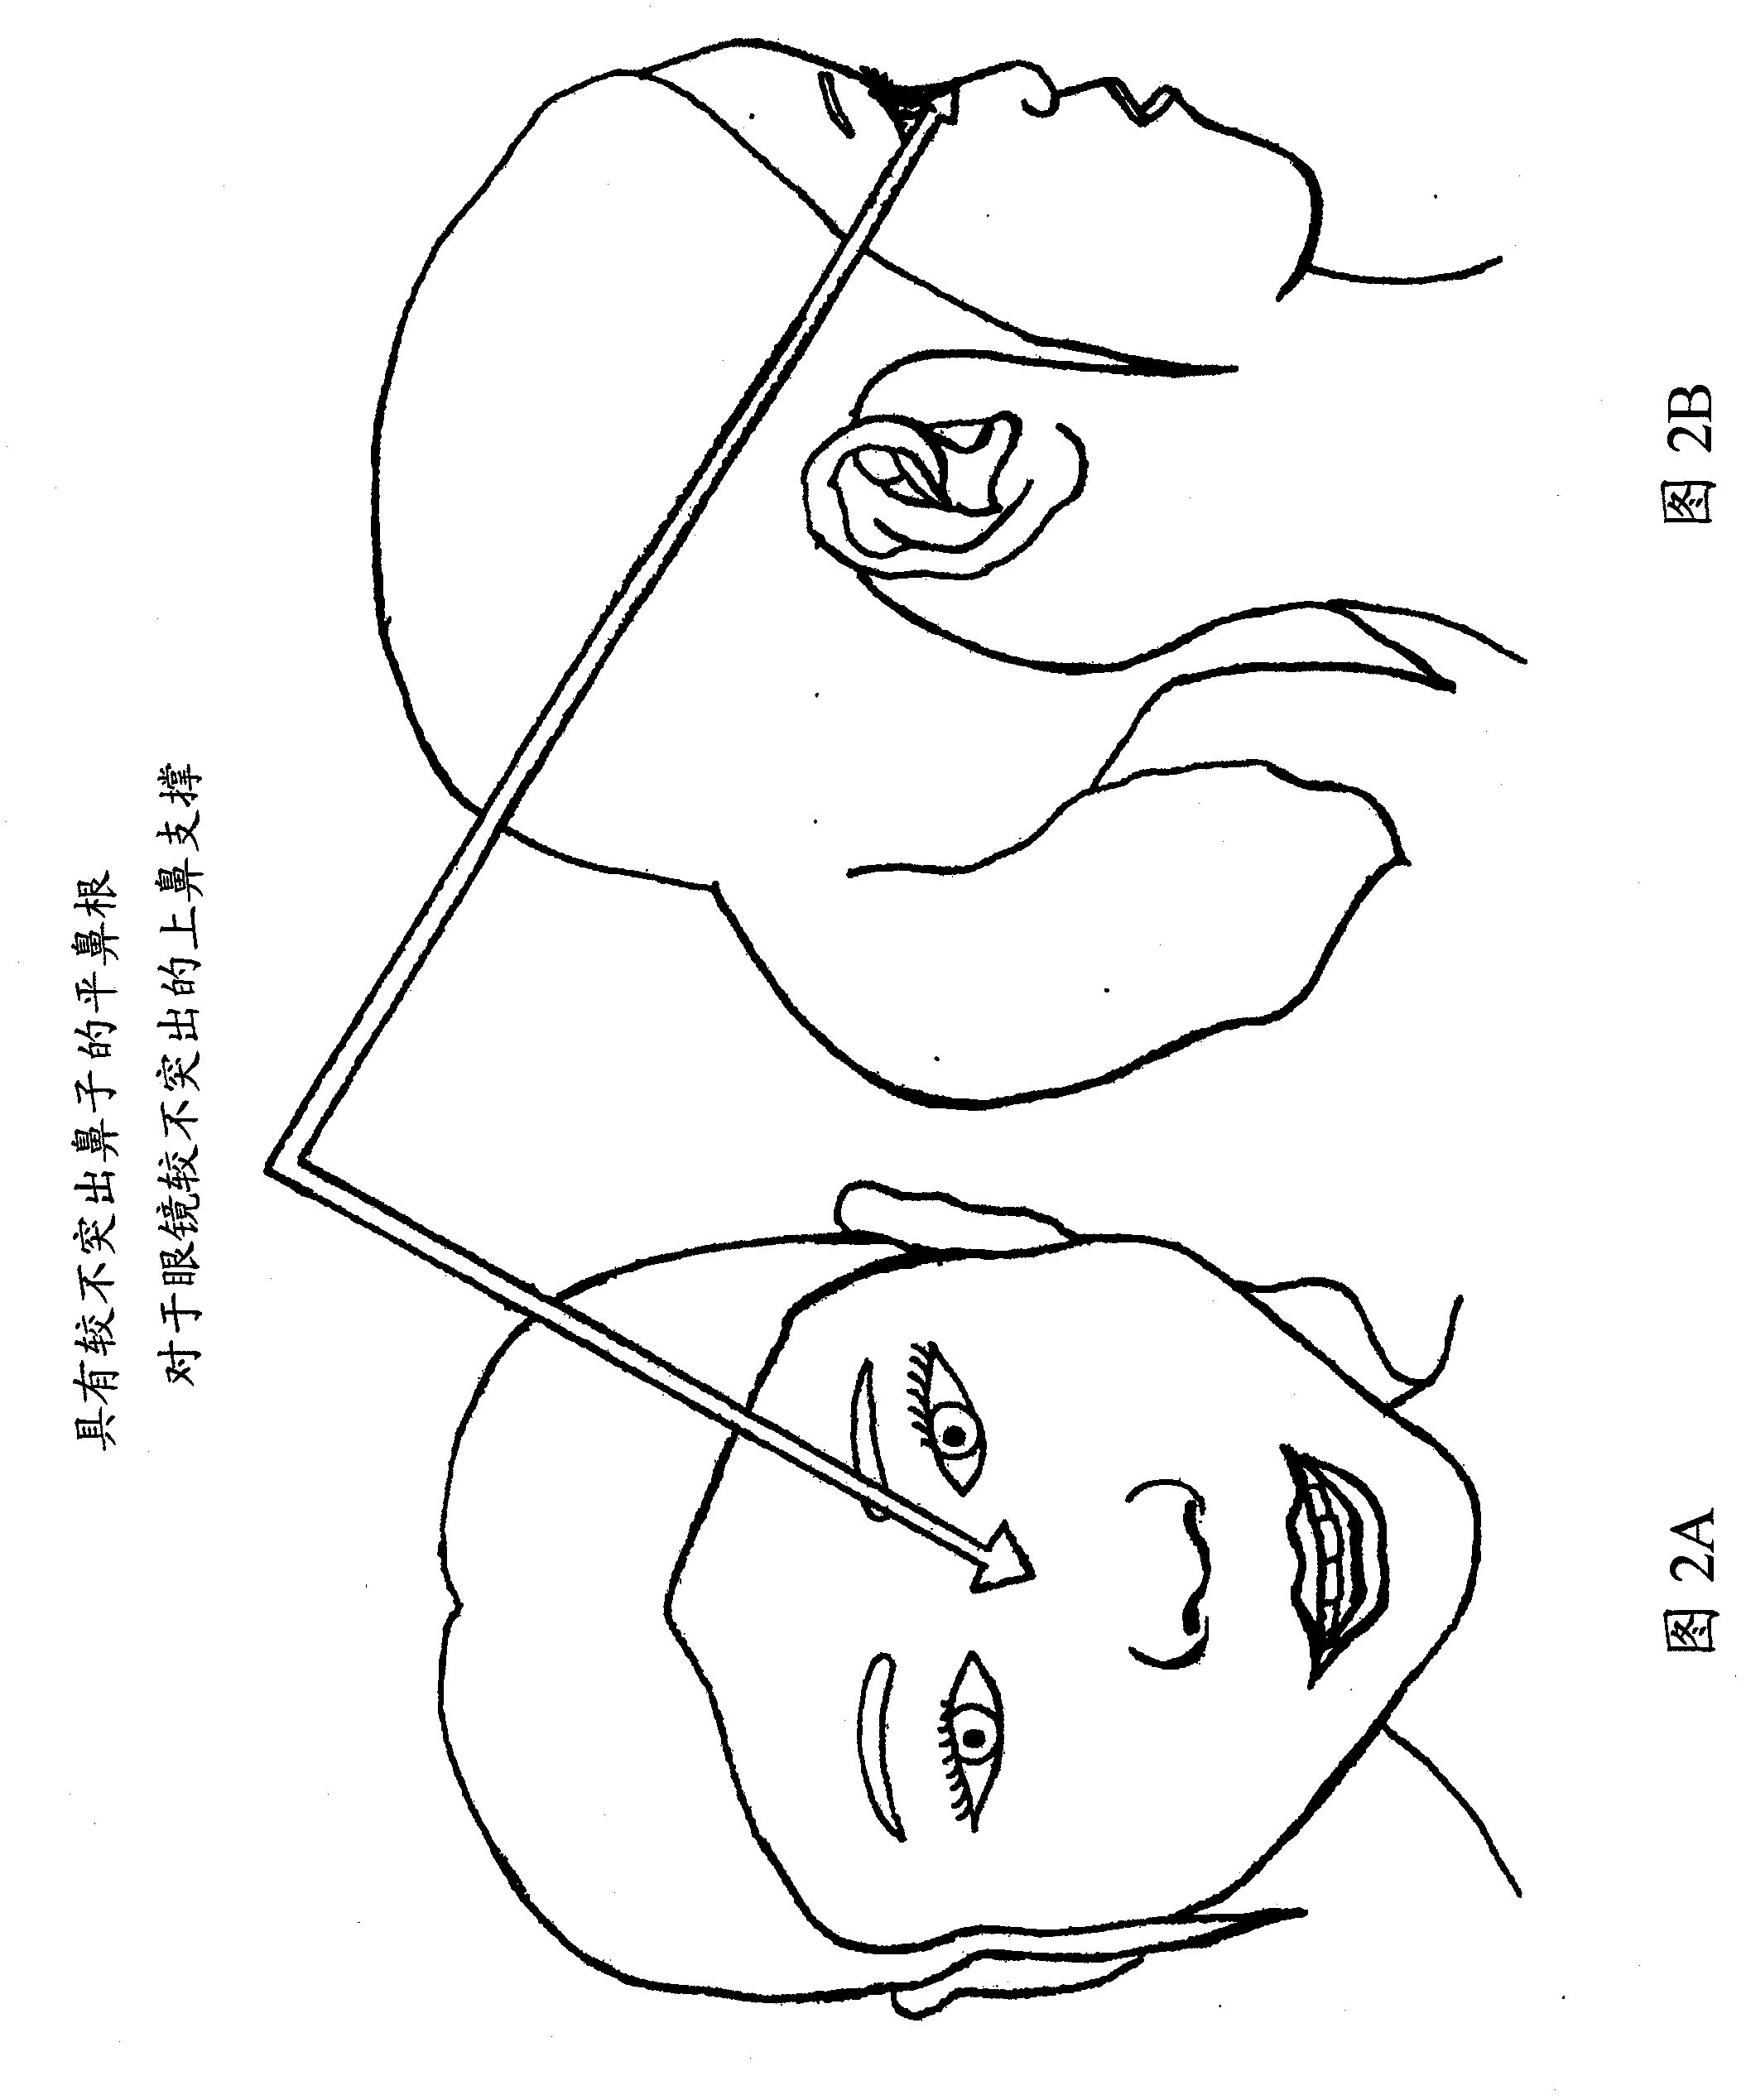 Spectacle assembly for faces without a prominent upper nasal support